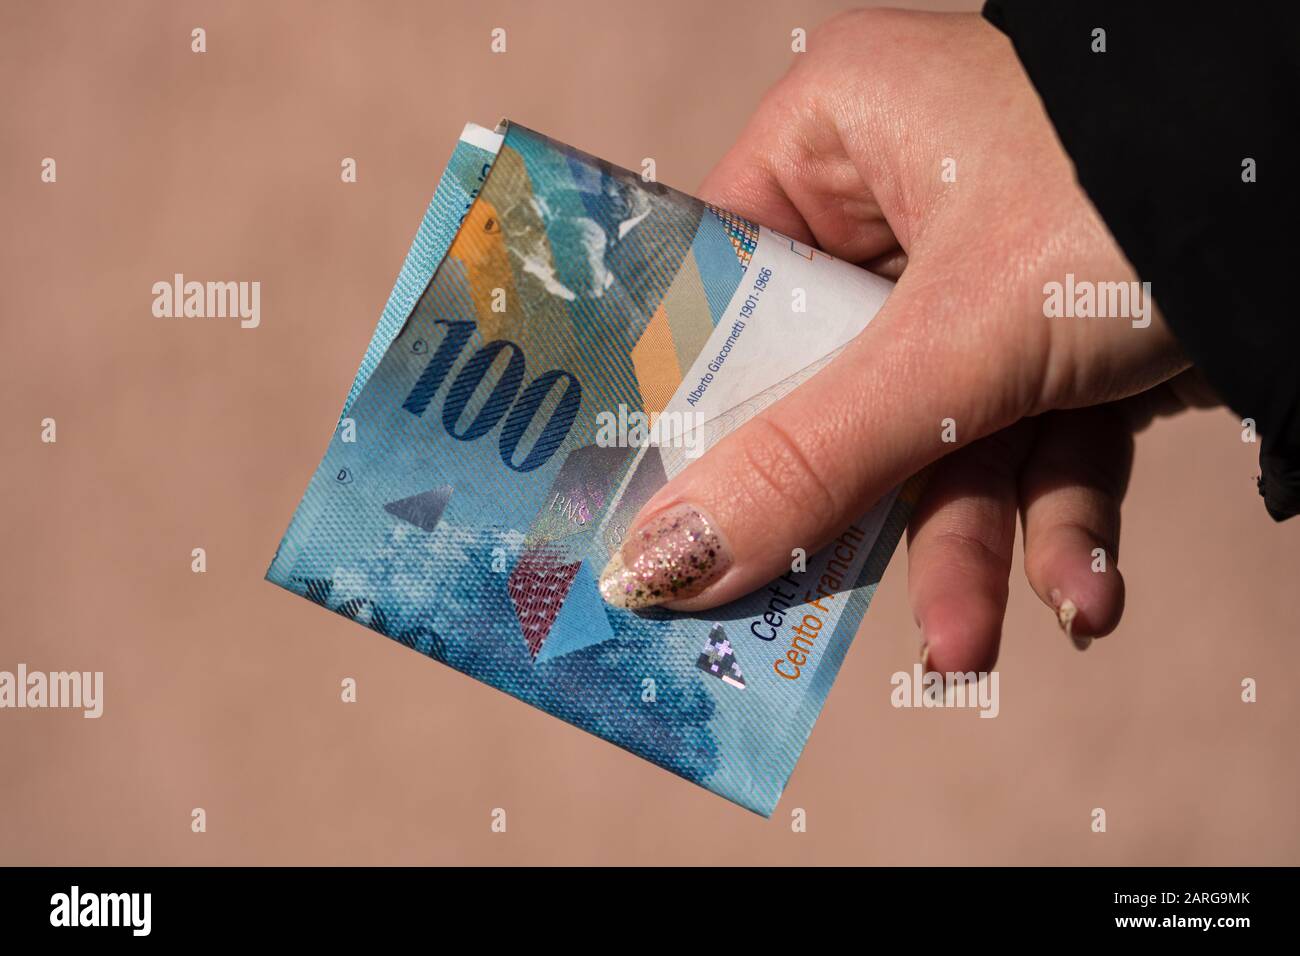 100 Chf High Resolution Stock Photography And Images Alamy